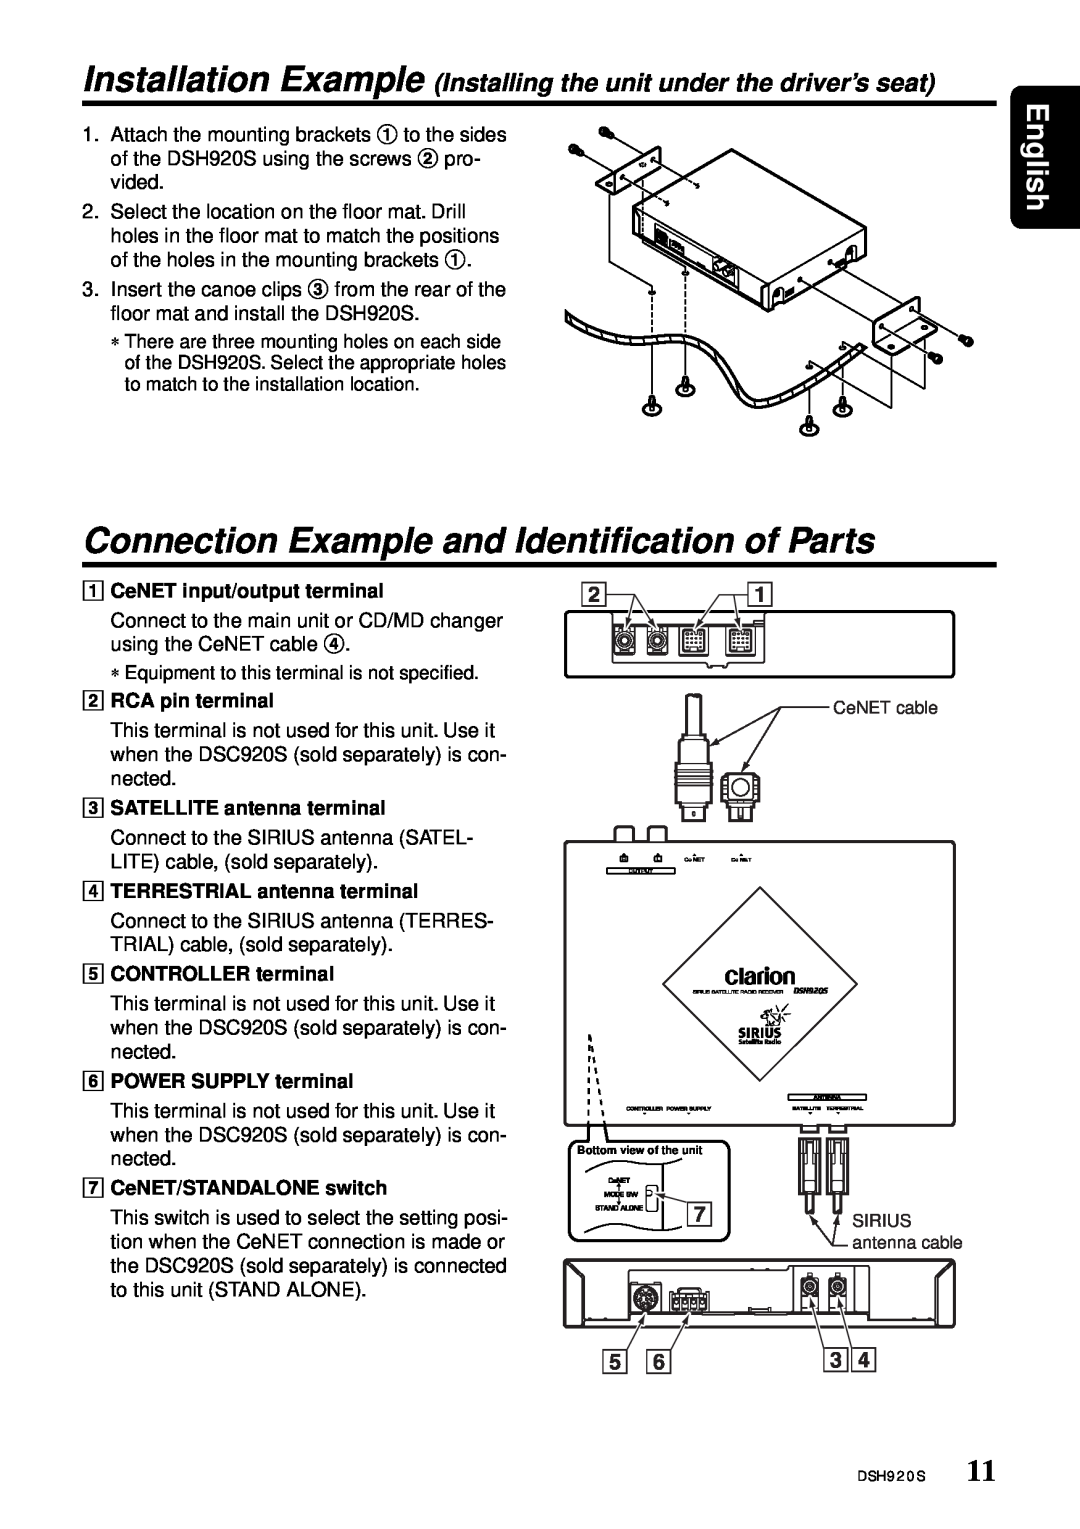 Clarion DSH920S Connection Example and Identification of Parts, English, CeNET input/output terminal, RCA pin terminal 